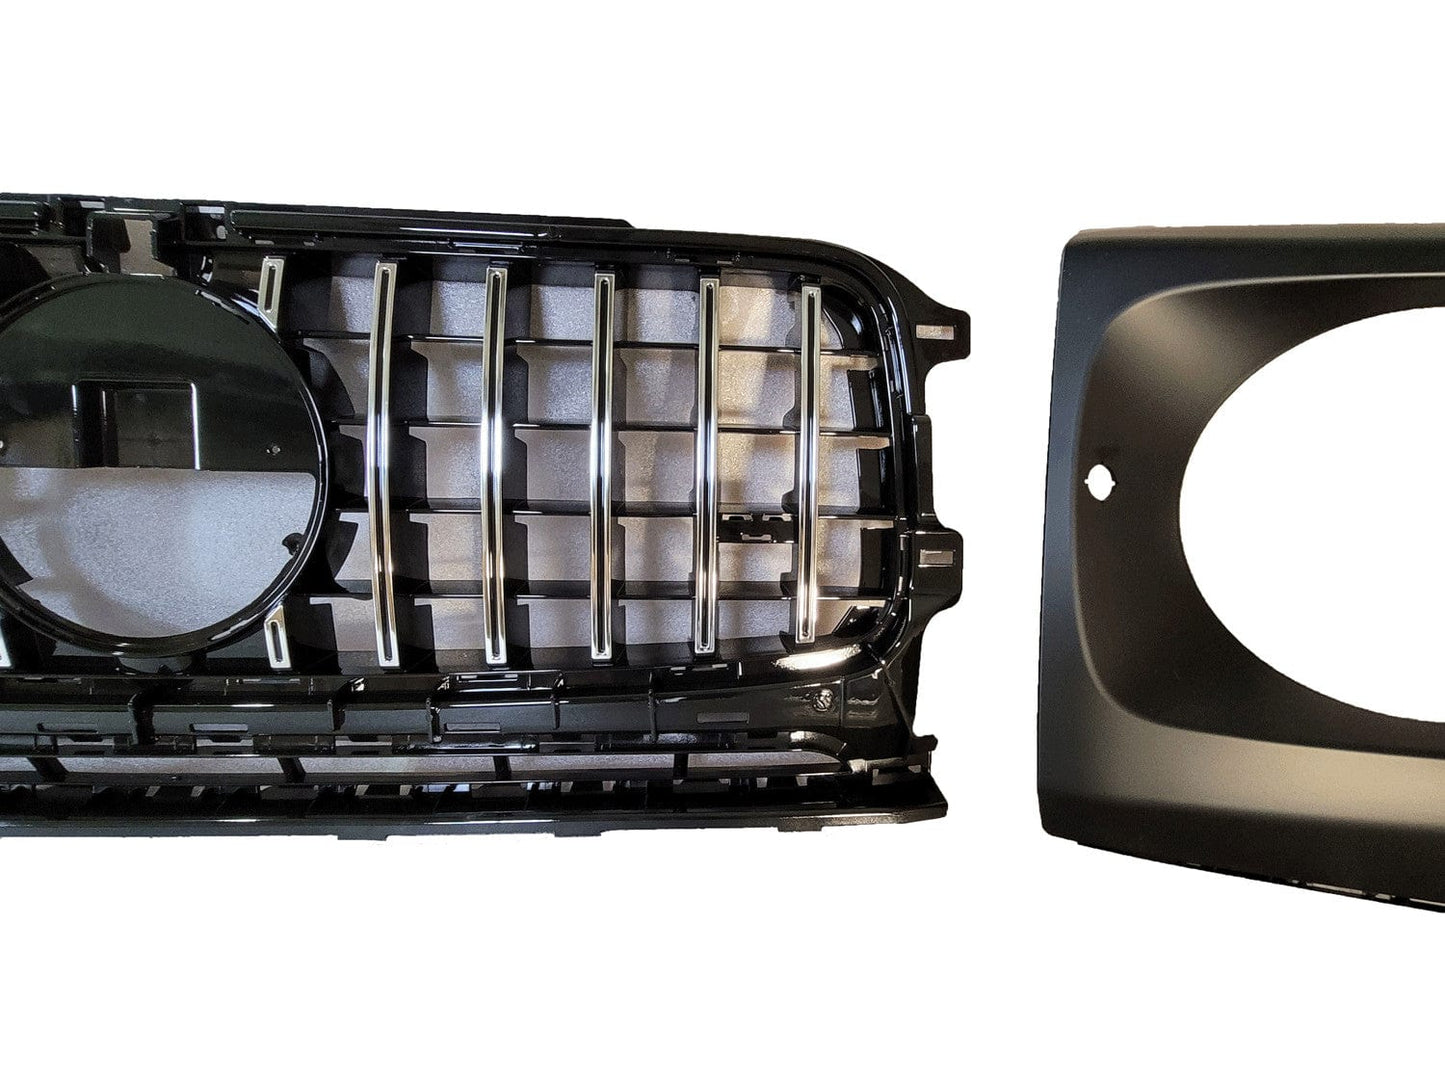 Grill compatible with Mercedes G class W463 with headlight covers gloss black chrome